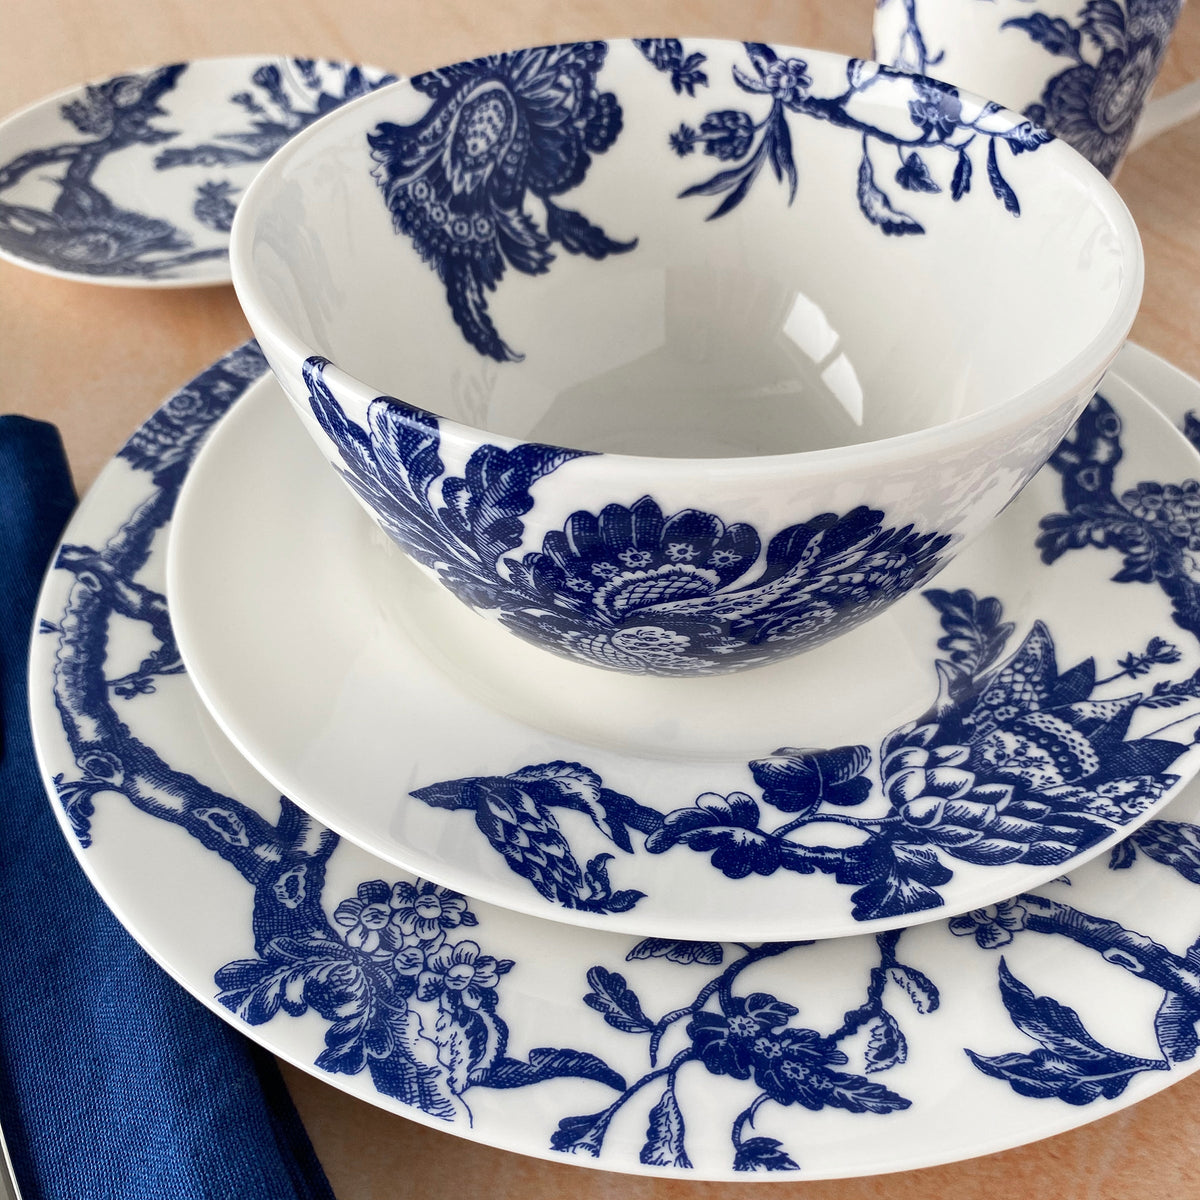 The blue and white porcelain Arcadia 4-Piece Place Setting by Caskata includes dinner, salad, bread and butter plates and cereal bowl.